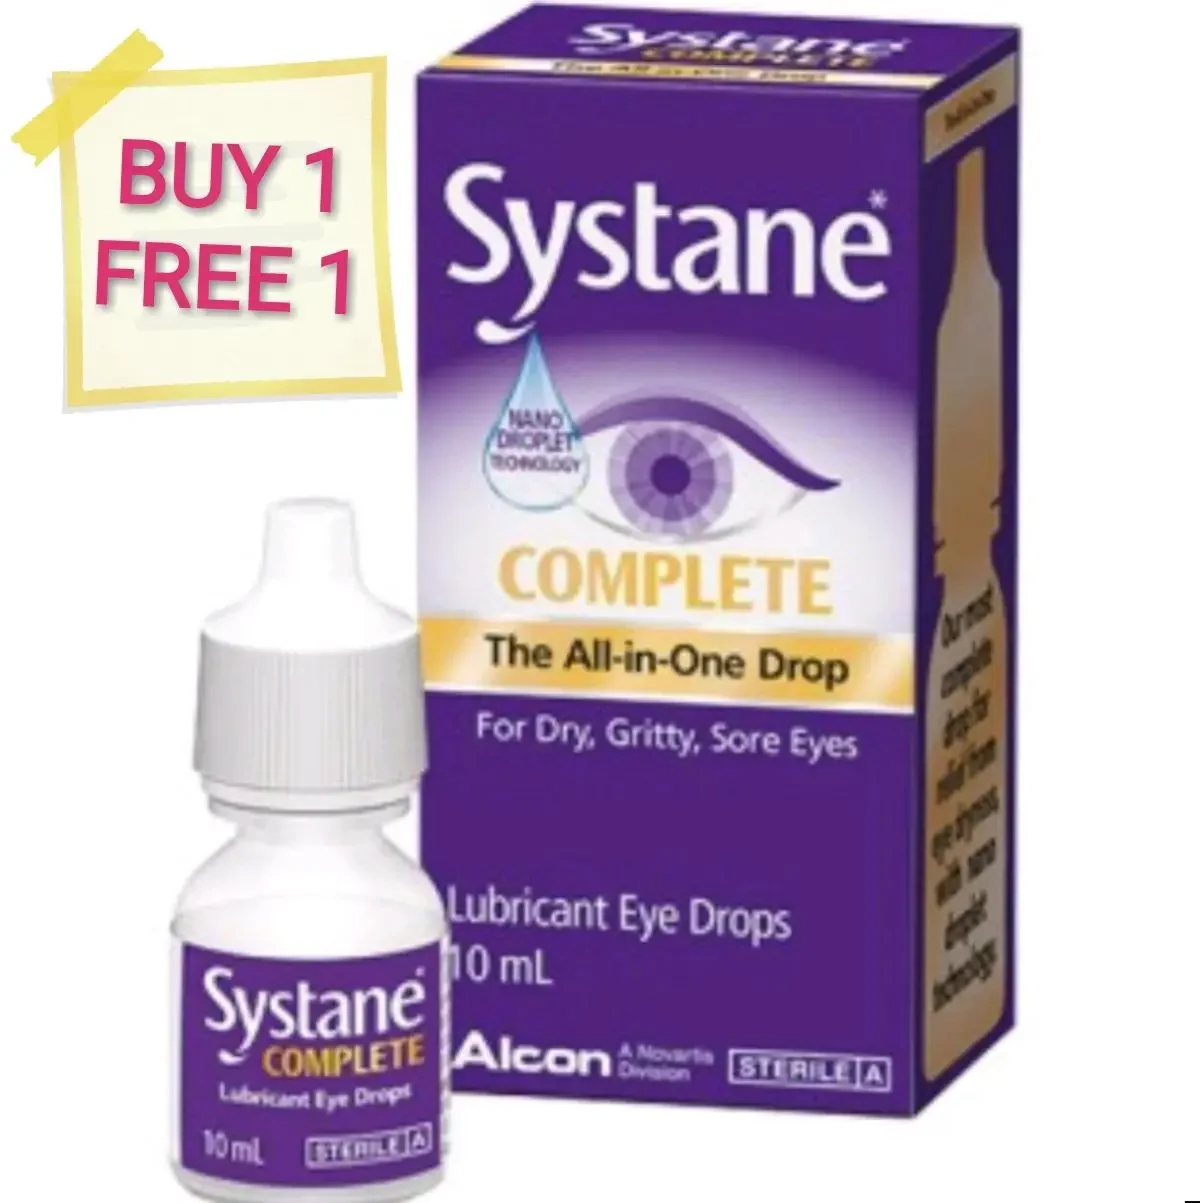 Alcon Systane Complete The All In One Eye Drop 10ml Buy one Free one (1 bot EXP 07/22 free 1 bot EXP 11/21)